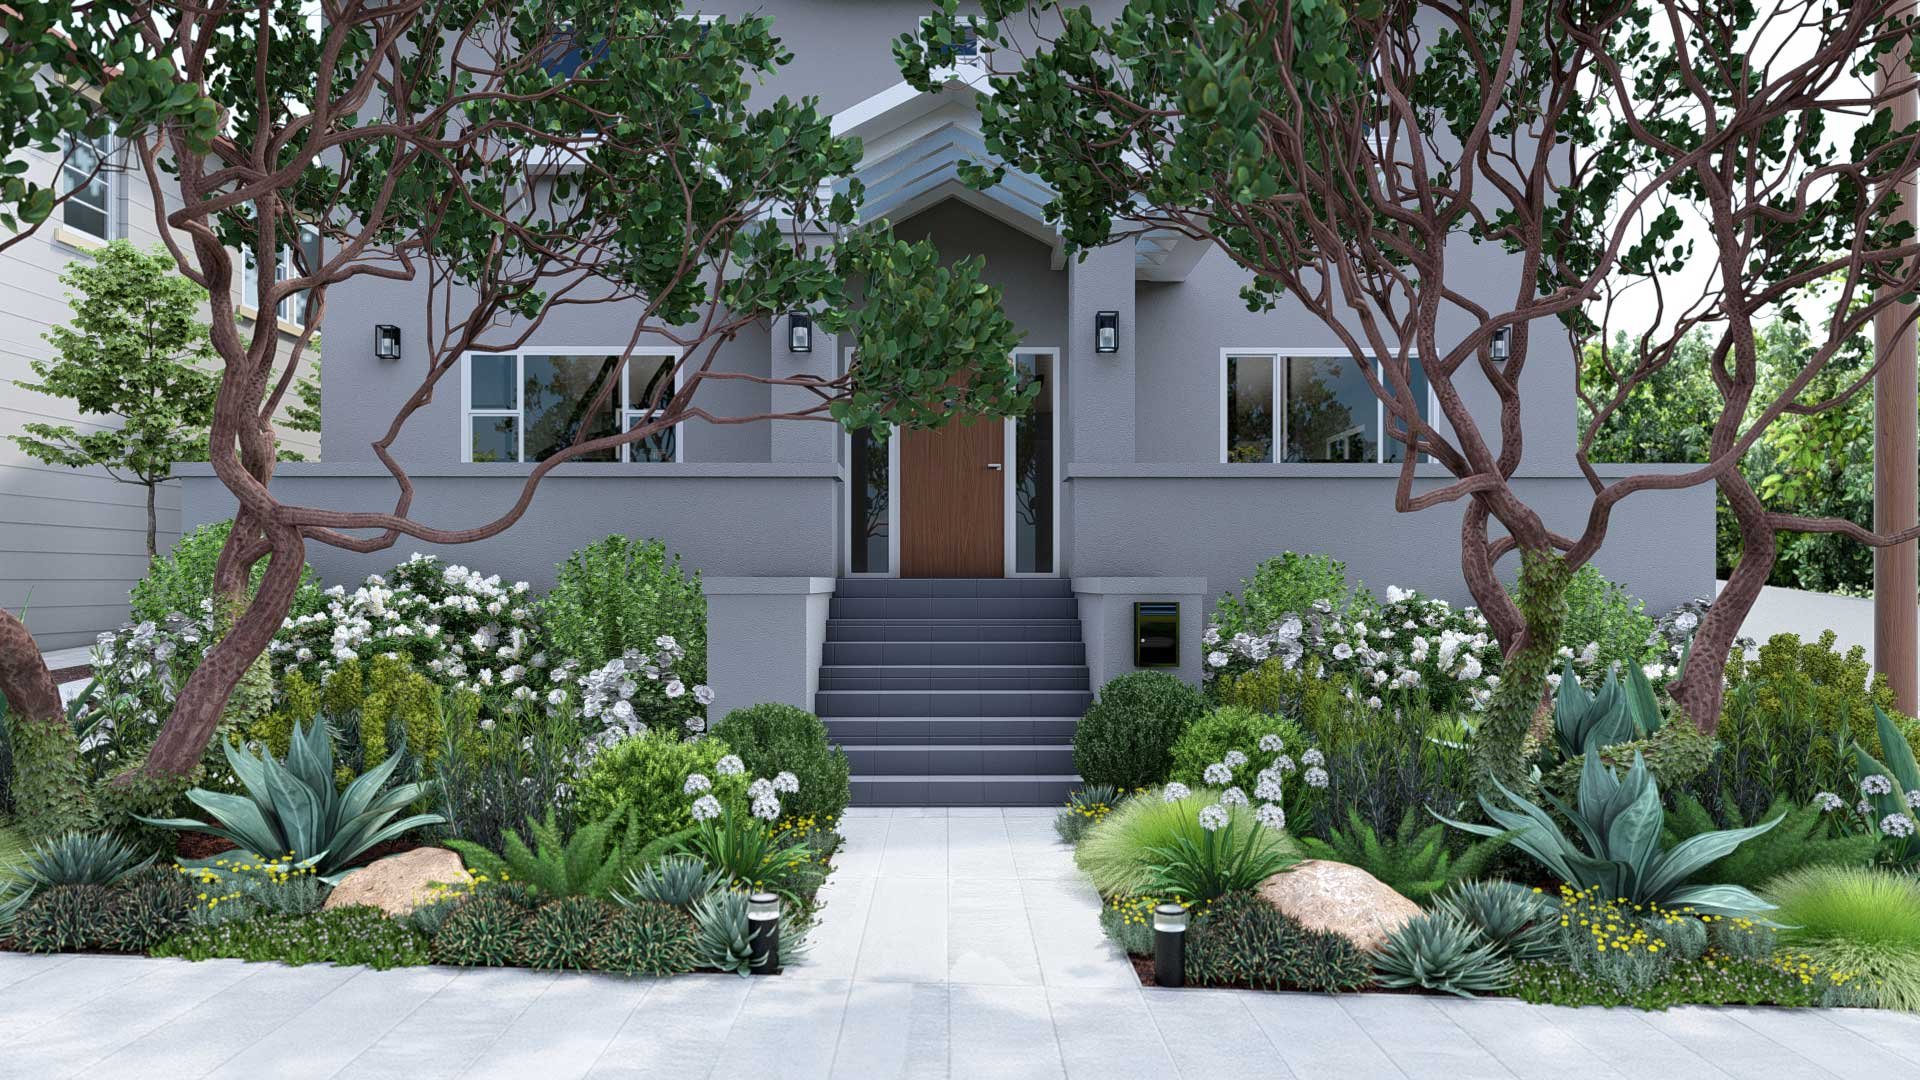  Ground level planting stays low along paths and beneath the tree, but swoops upward to embrace the porch and partially mask the tall porch walls. 